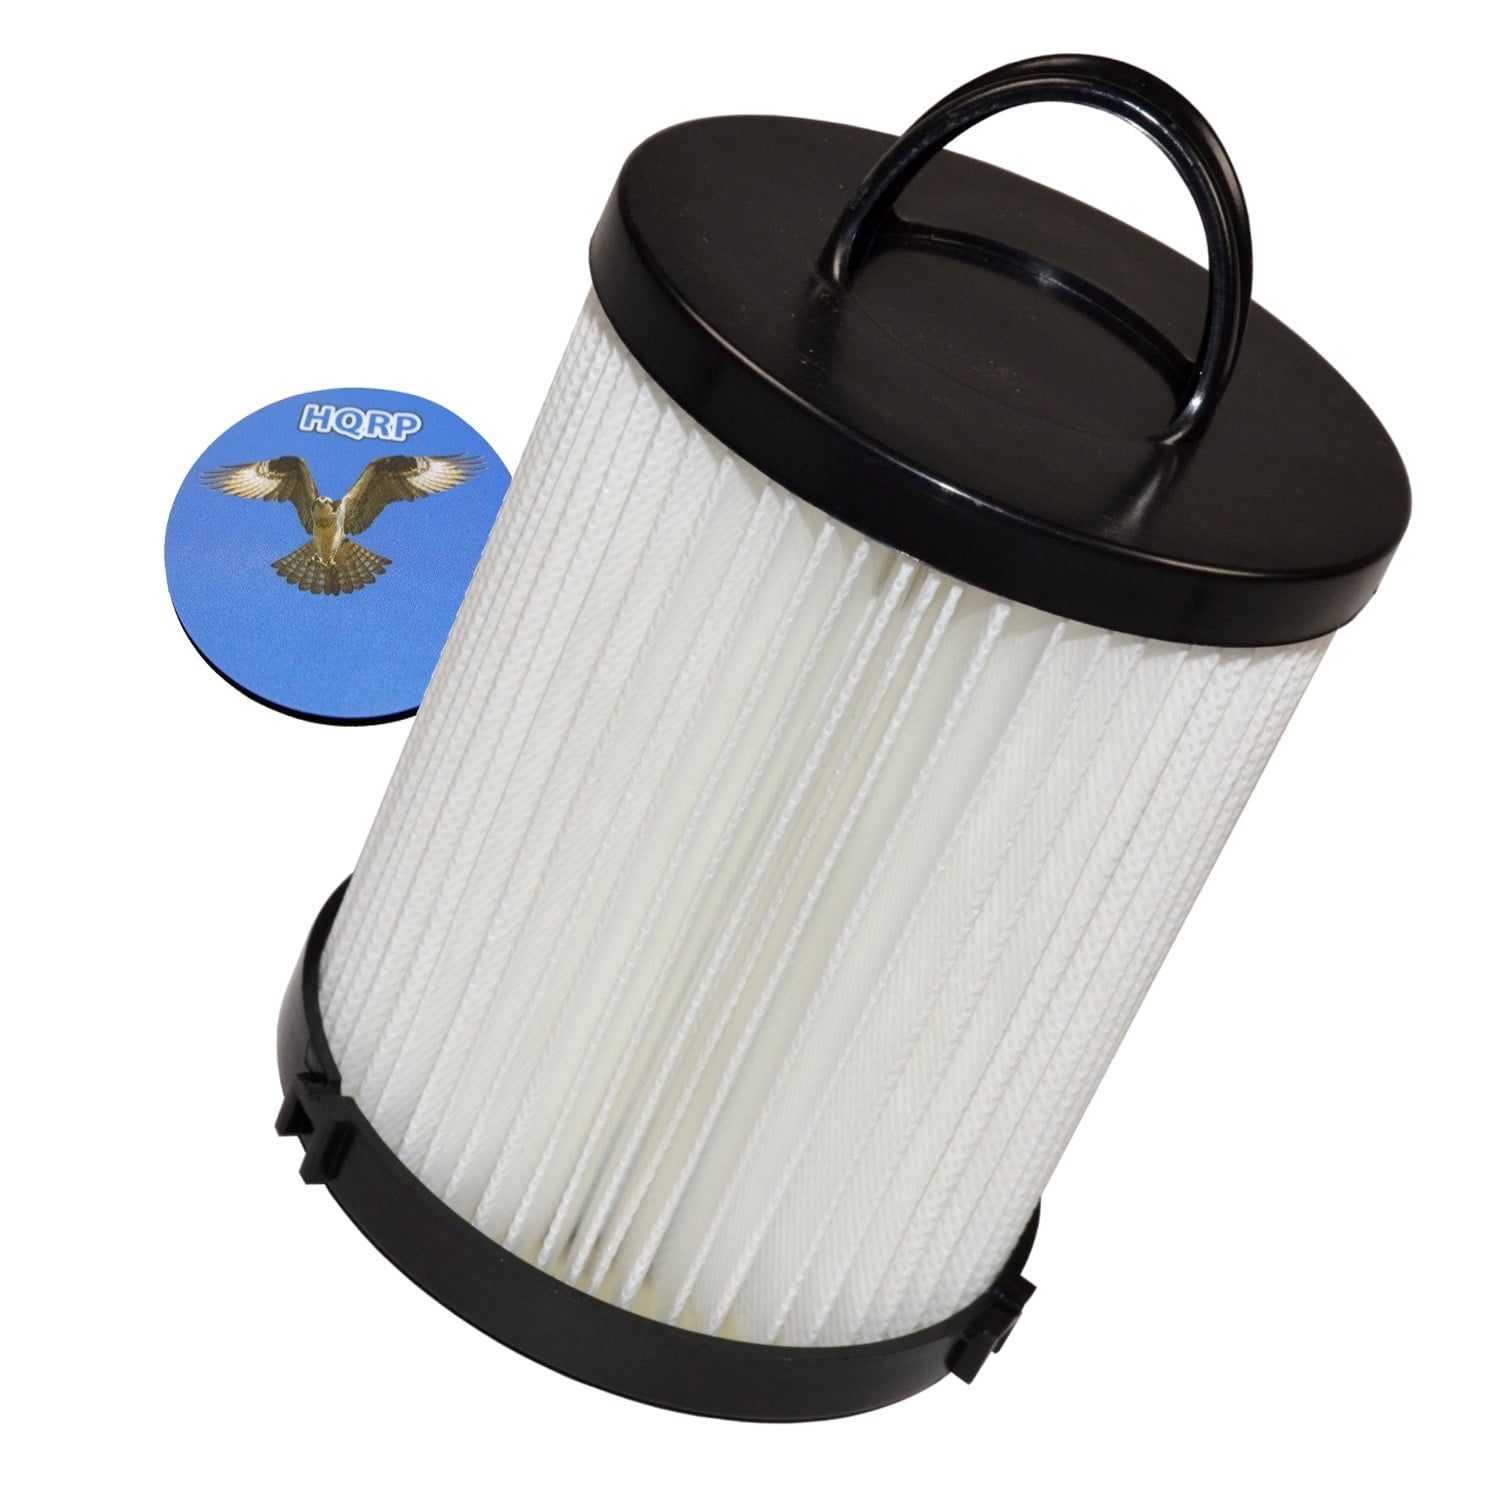 HQRP Dust Cup HEPA & Exhaust Filters for Eureka 3000 Series Upright Vacuums 